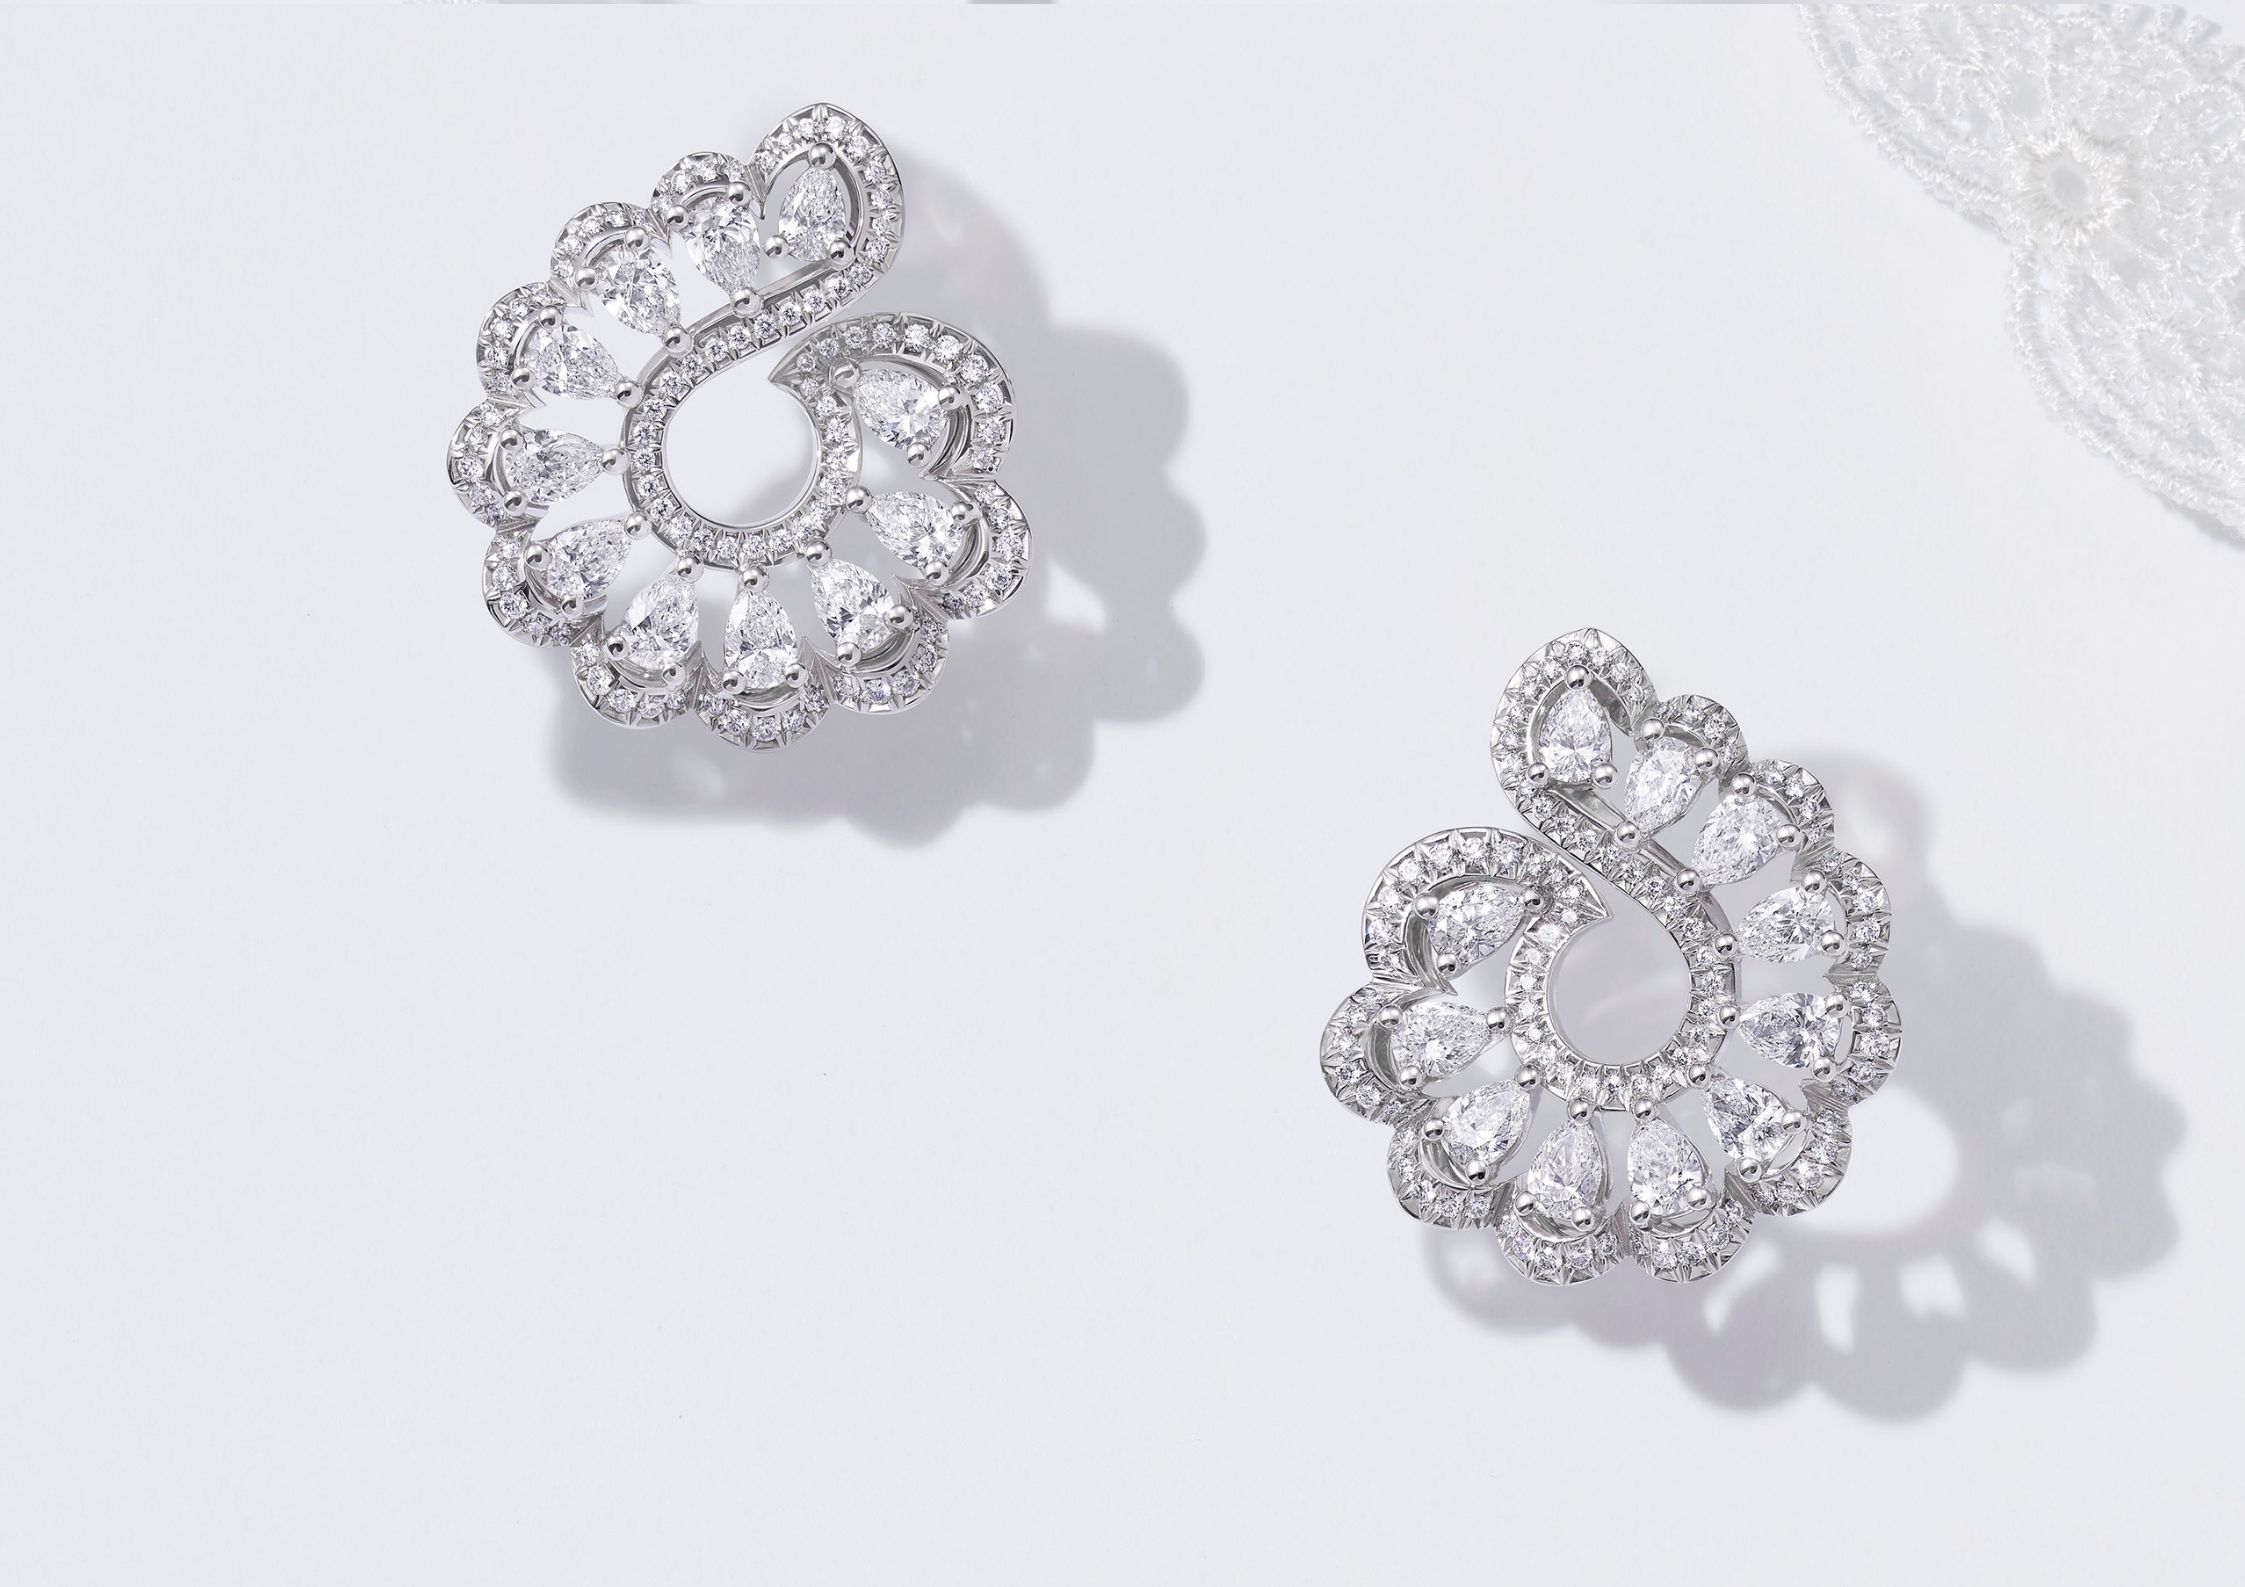 Chopard pays homage to lacemaking with classic diamonds - The